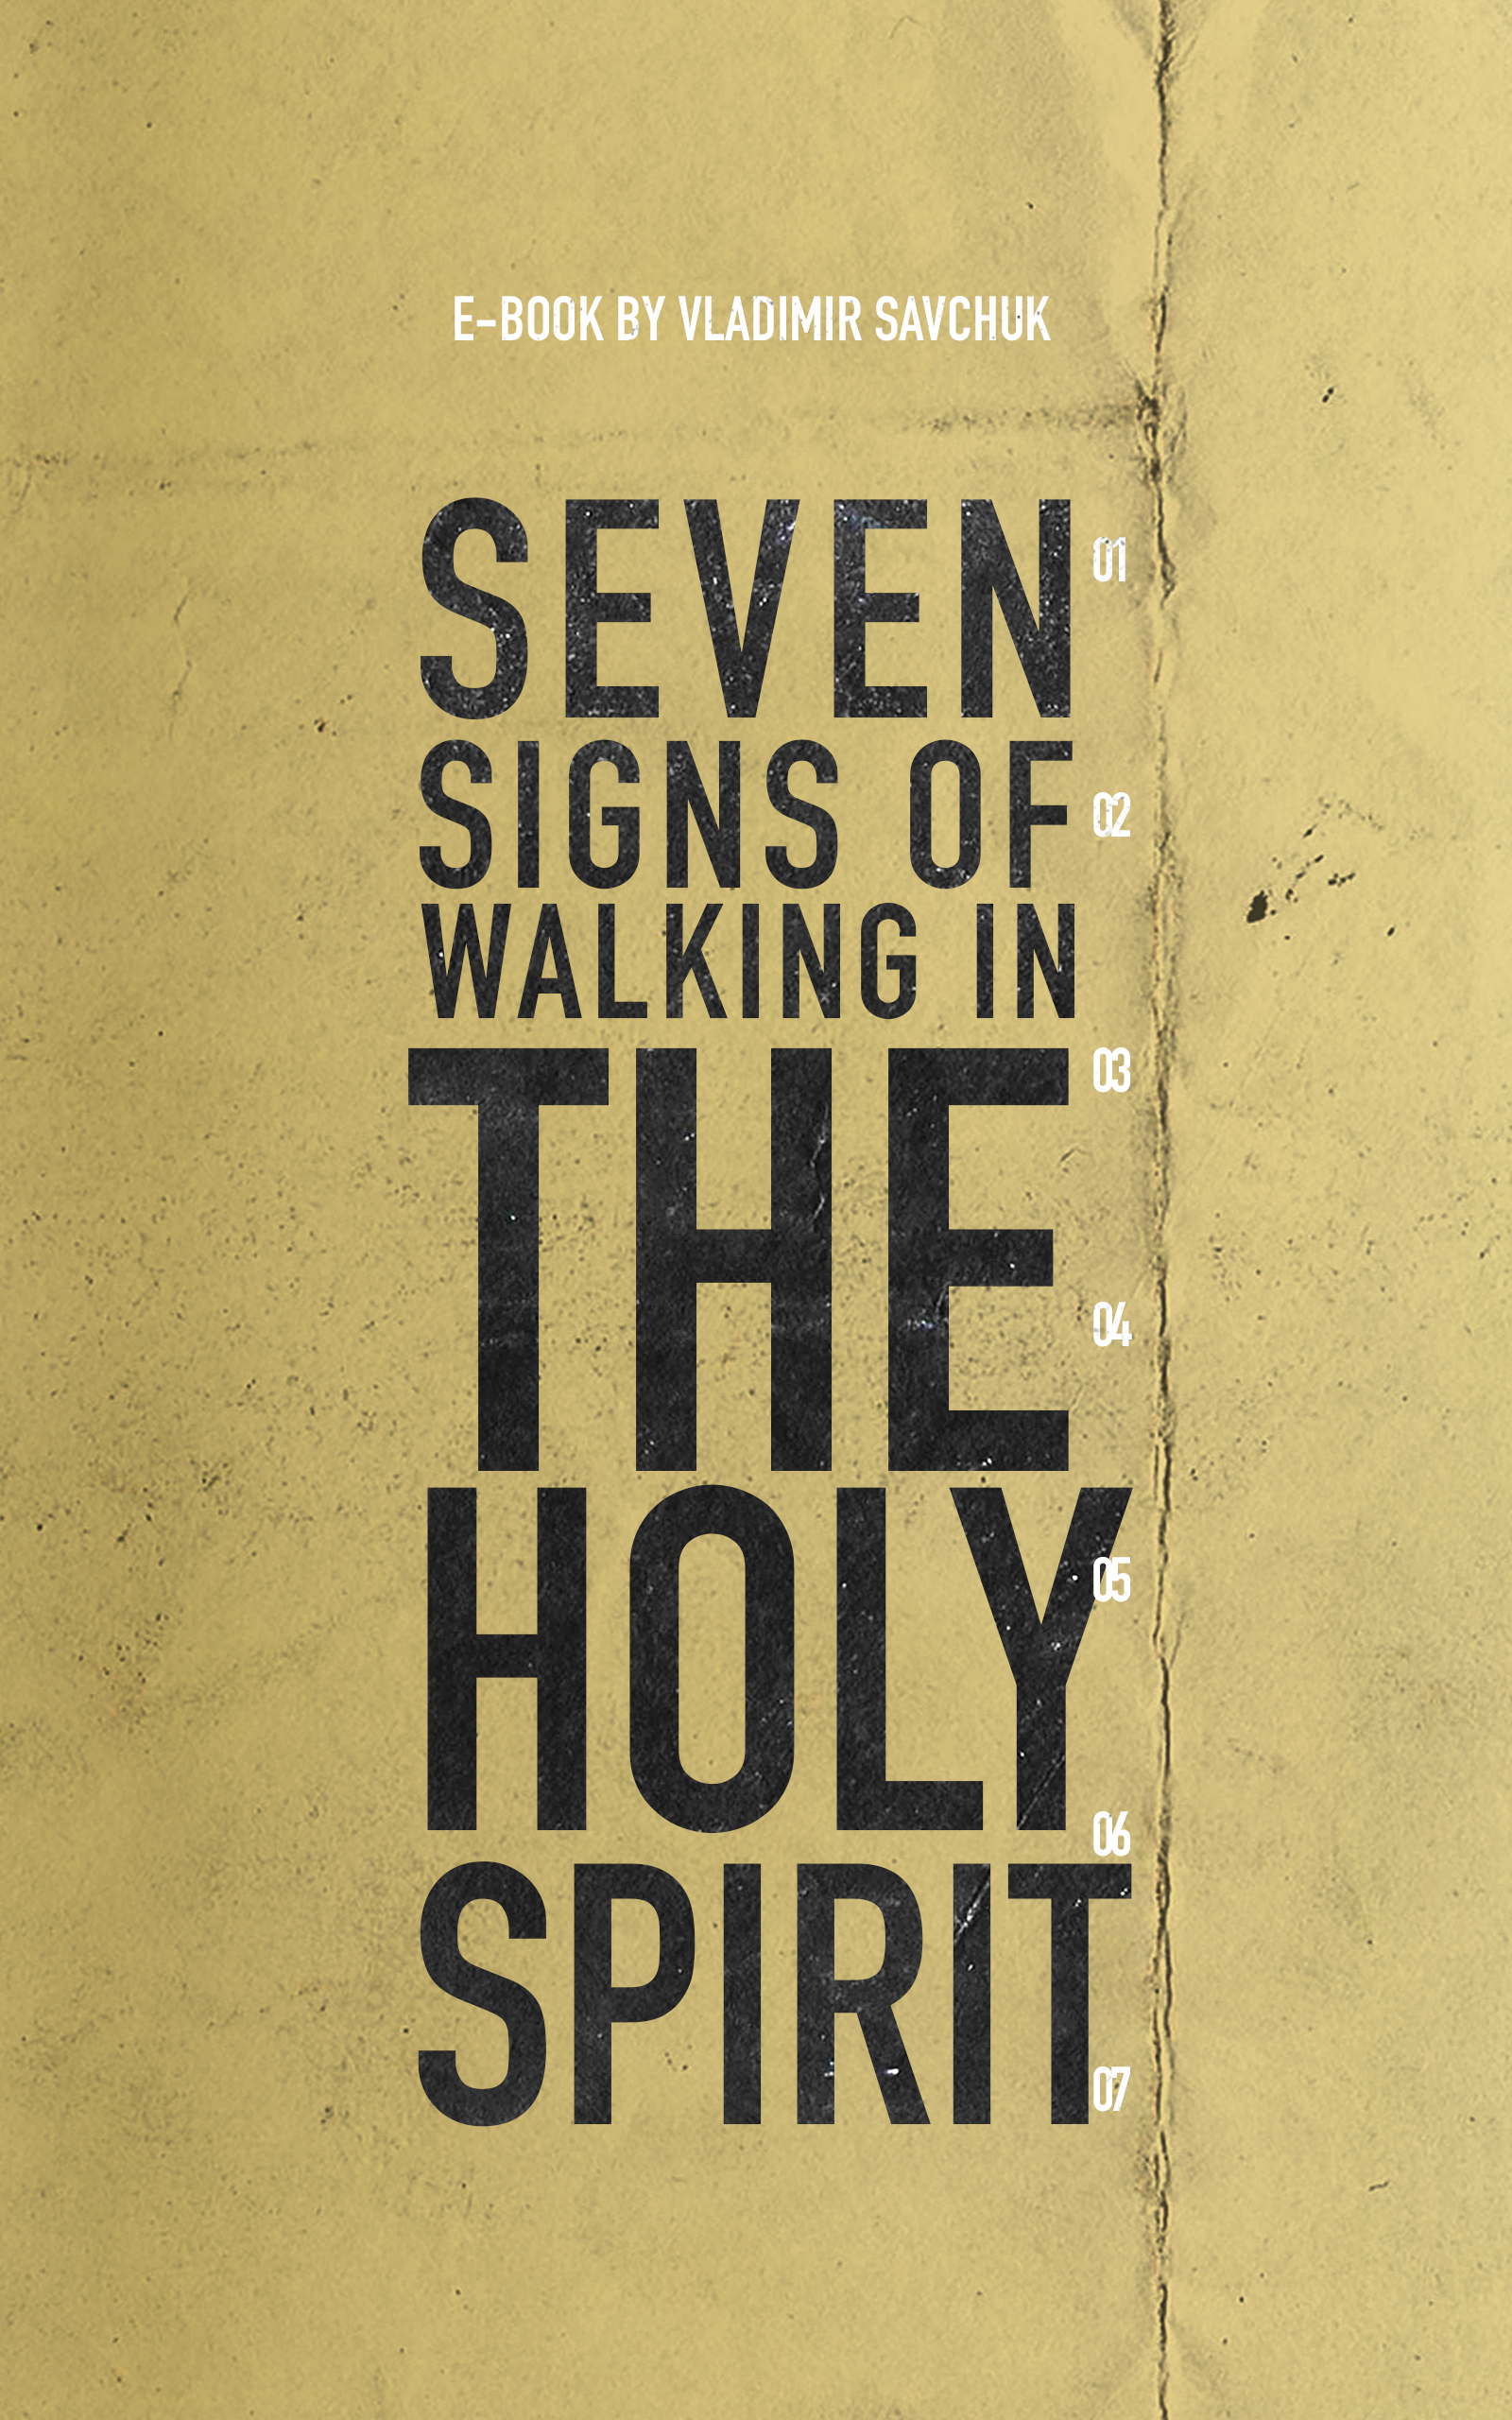 Featured Image for “Seven Signs of Walking in the Holy Spirit”